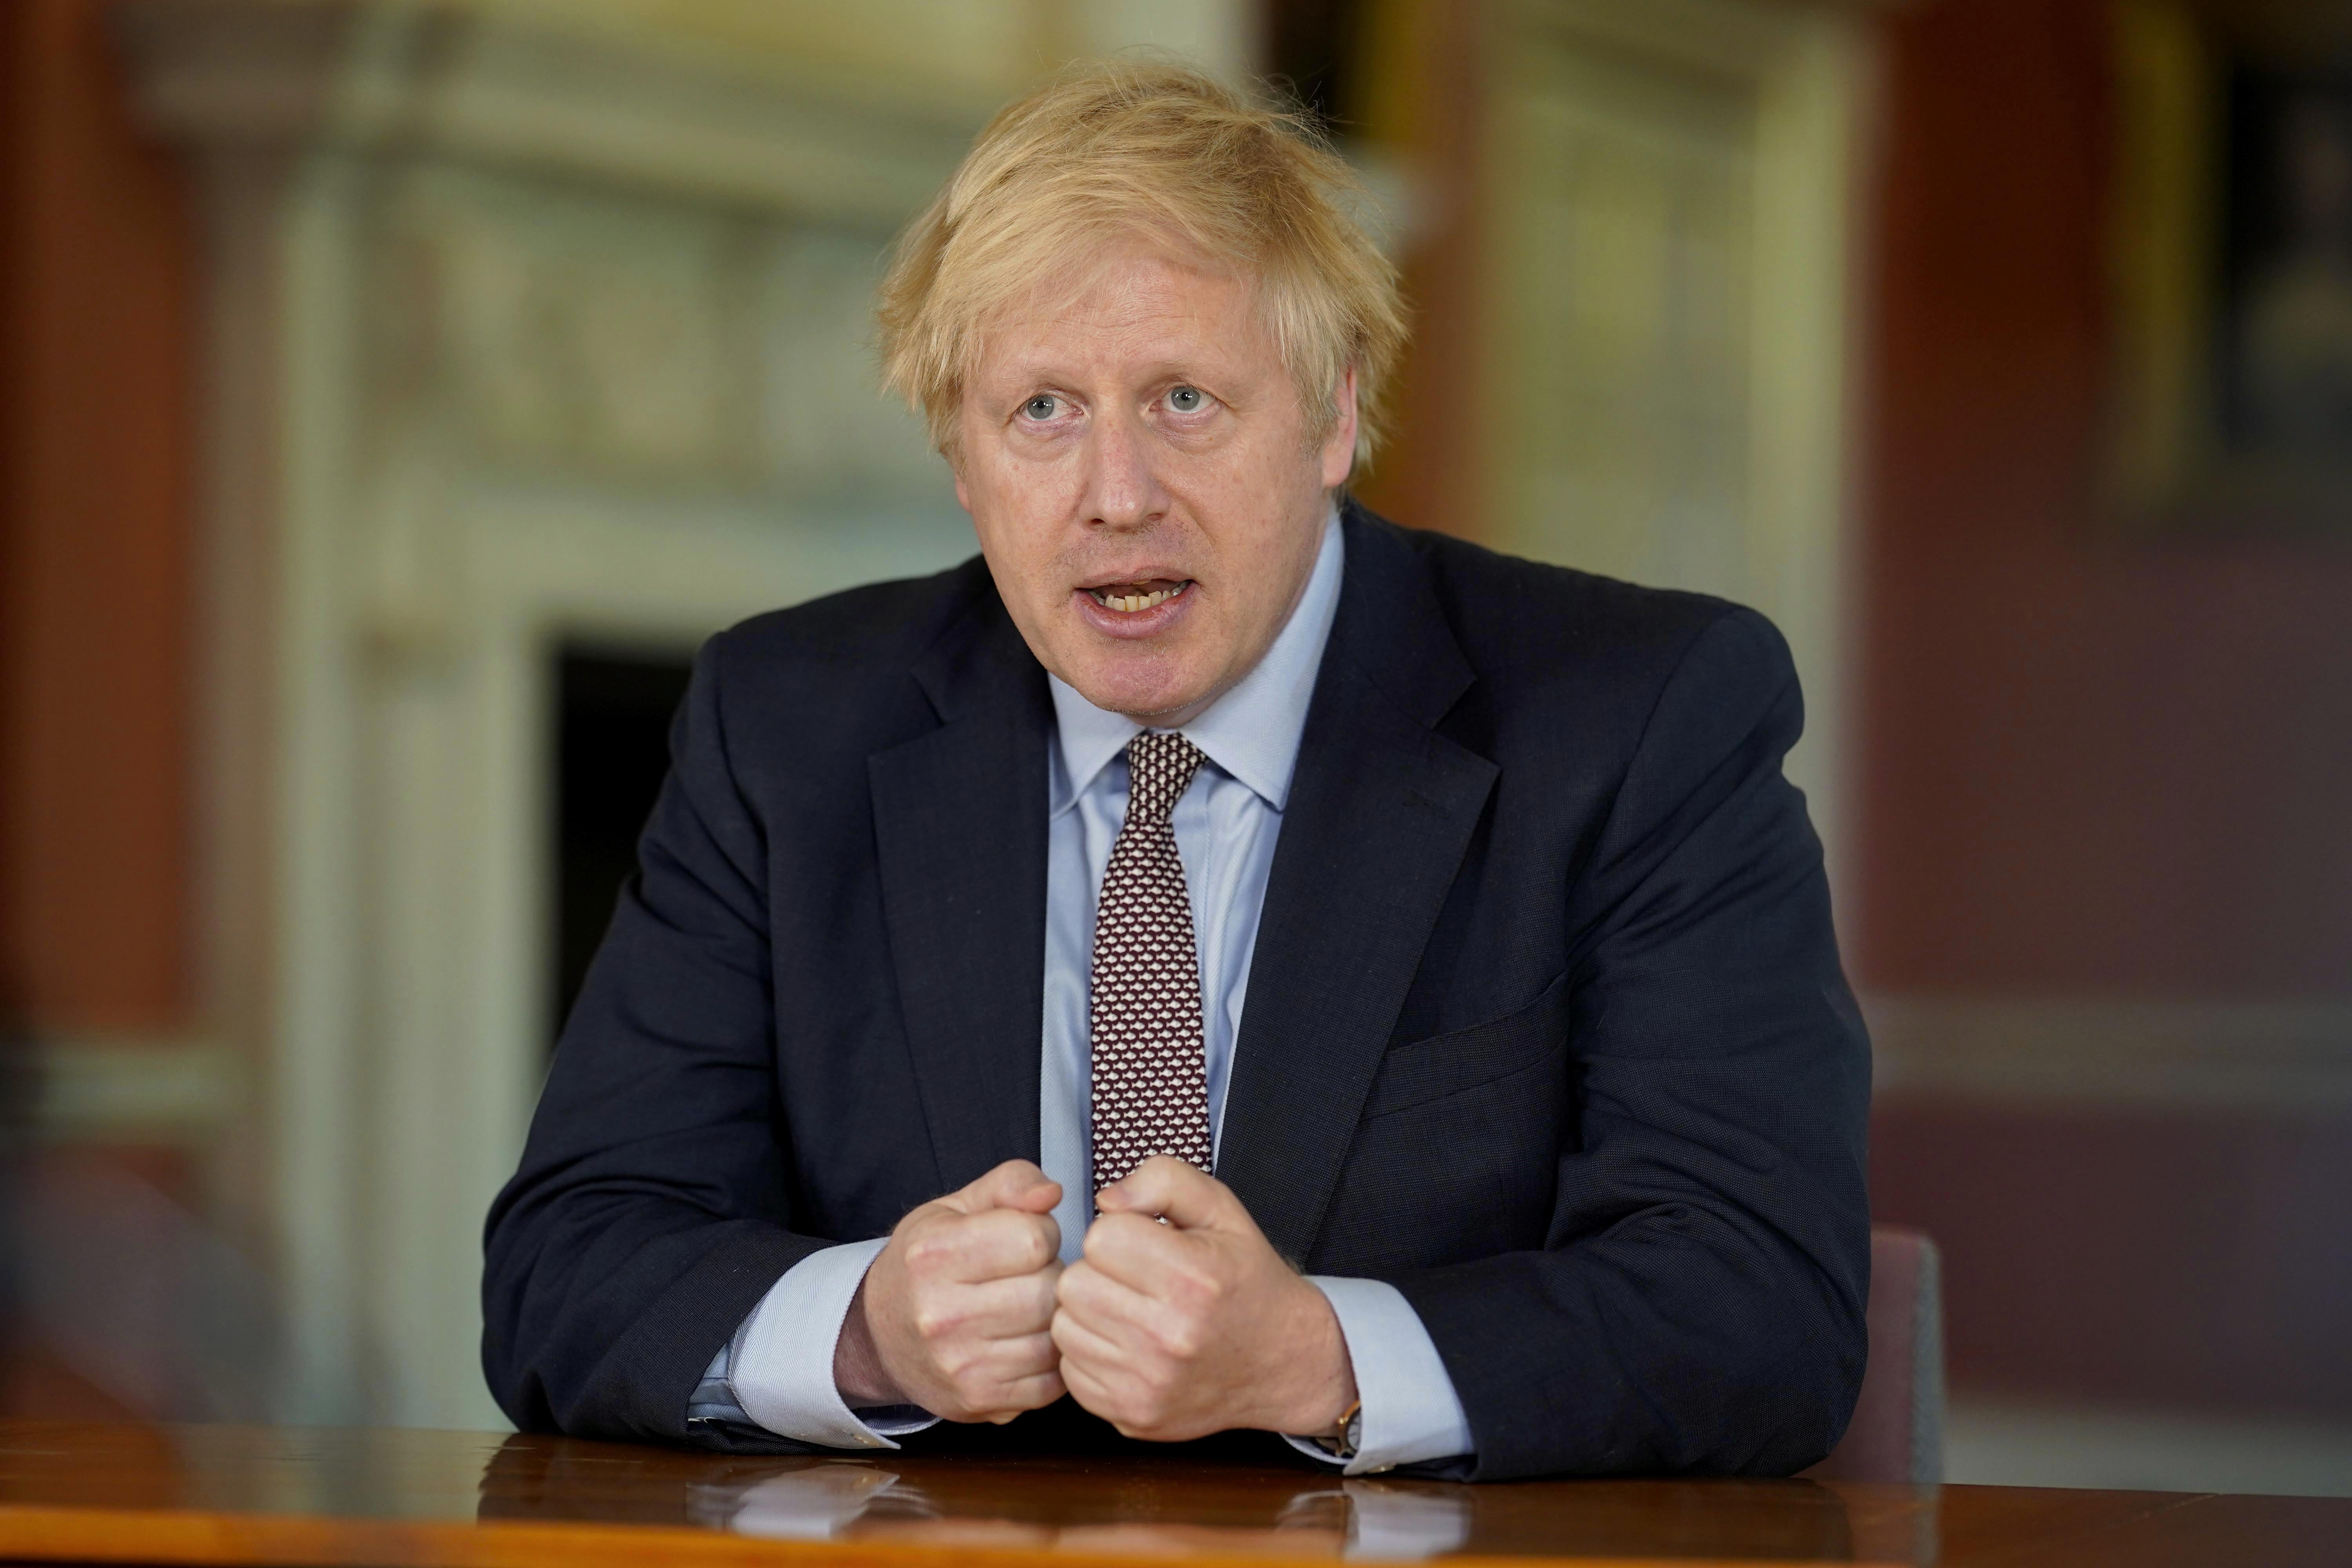 UK Prime Minister Boris Johnson records a televised message in London, which aired on May 10.